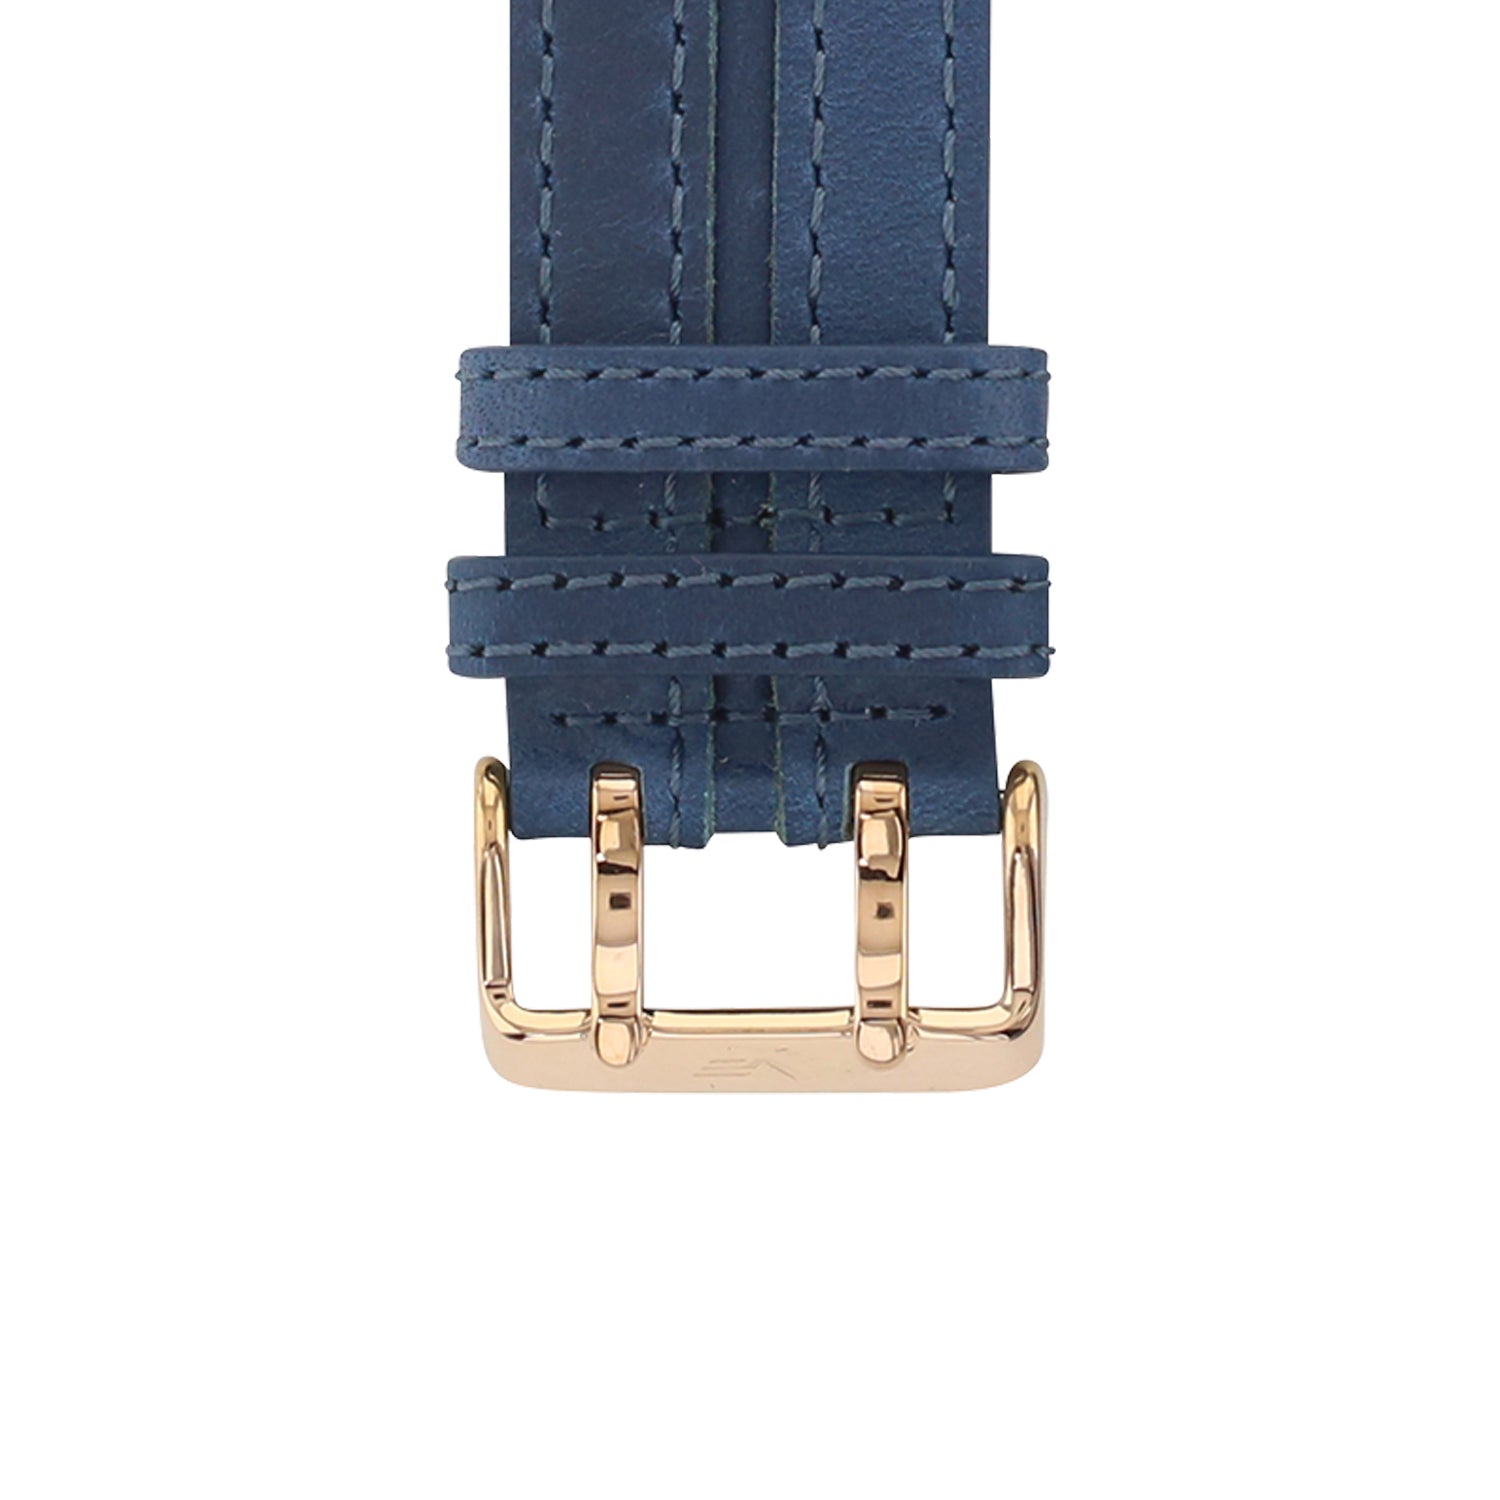 EXPEDITION BLUE LEATHER STRAP 24mm - ROSE GOLD BUCKLE